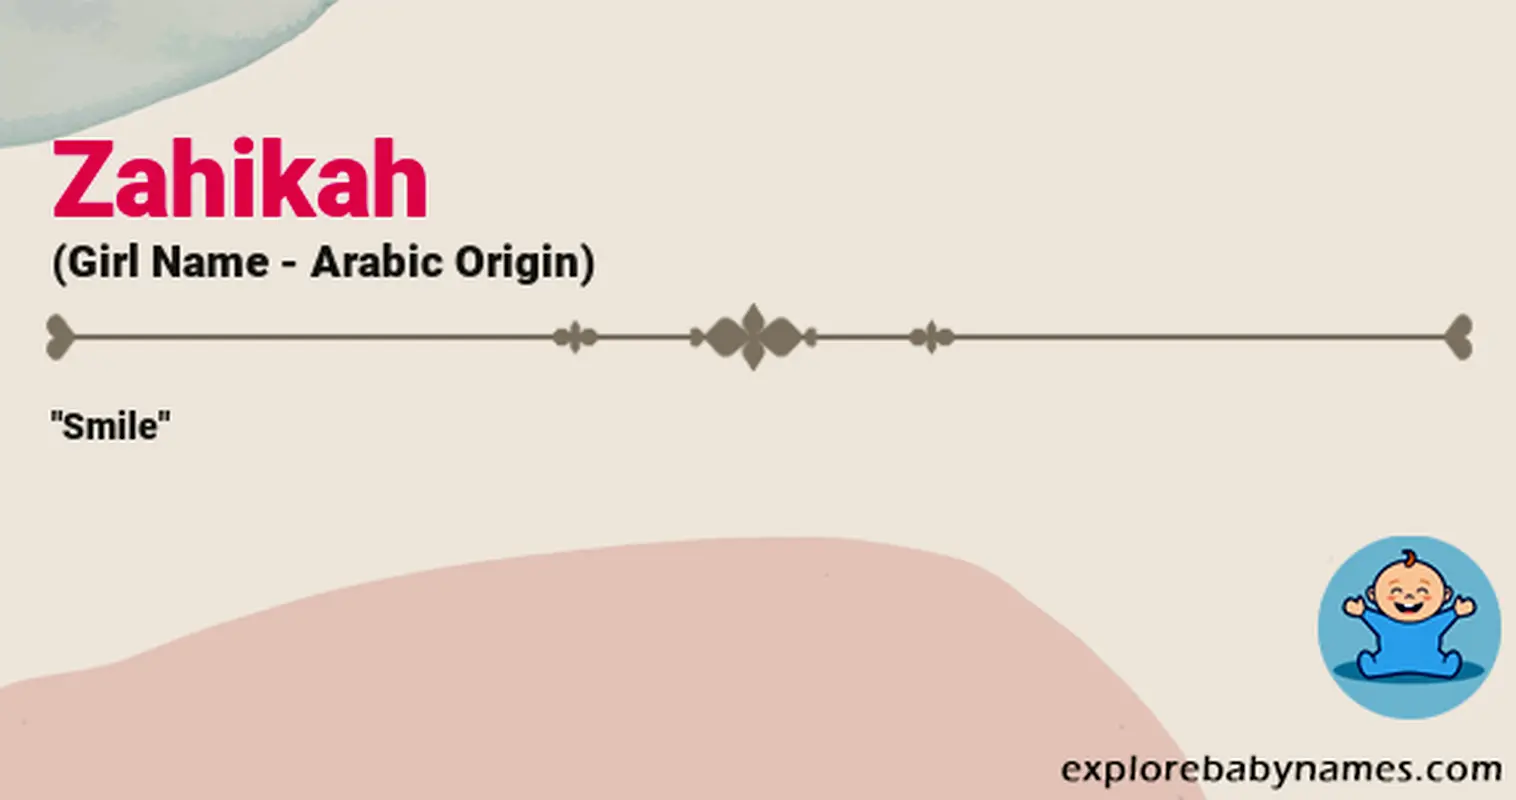 Meaning of Zahikah